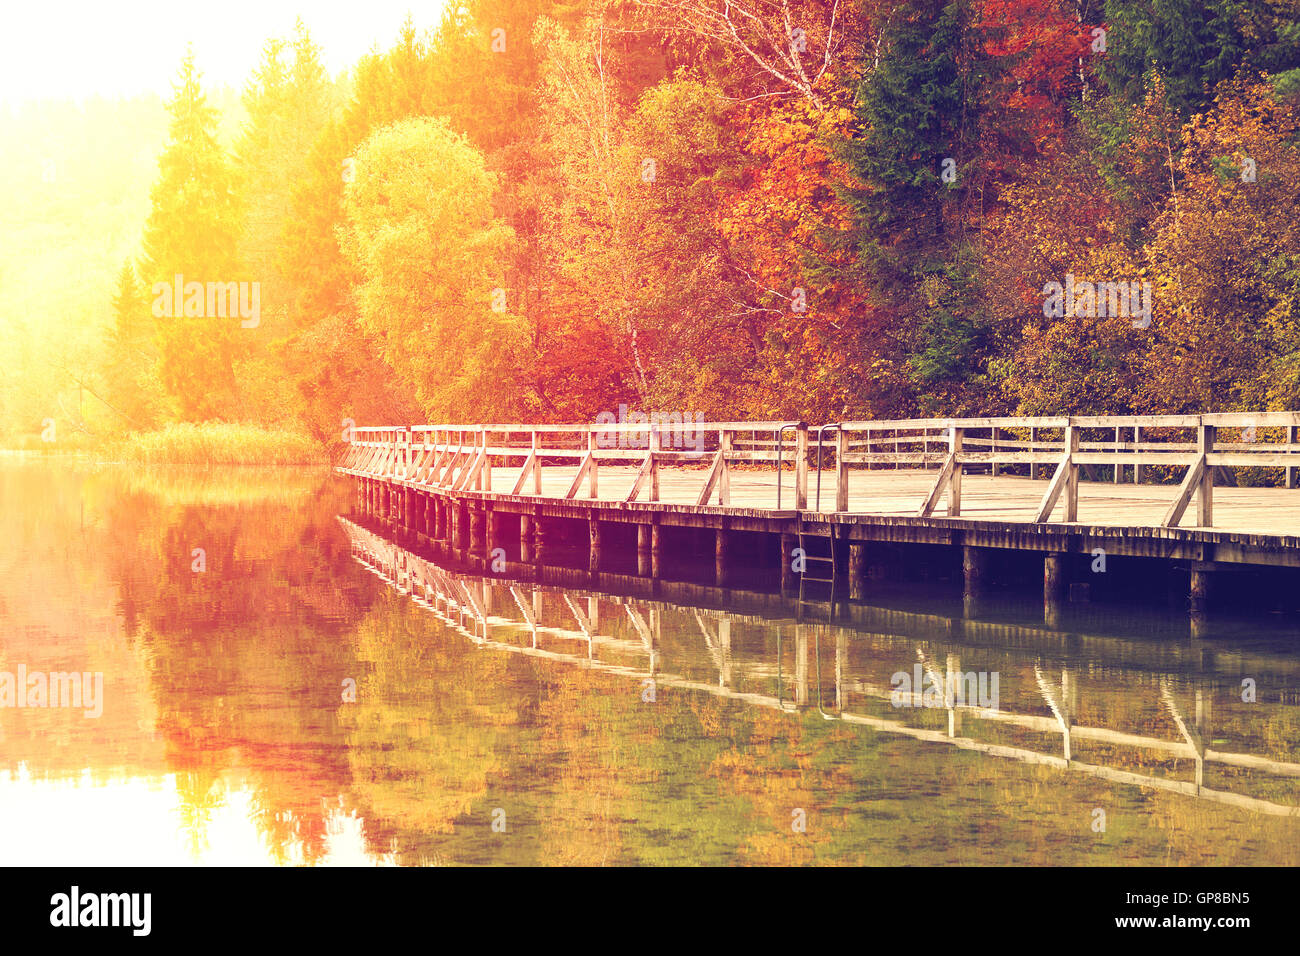 Yellow sun glow on autumn landscape with colorful trees and wooden pier reflected in the lake water Stock Photo